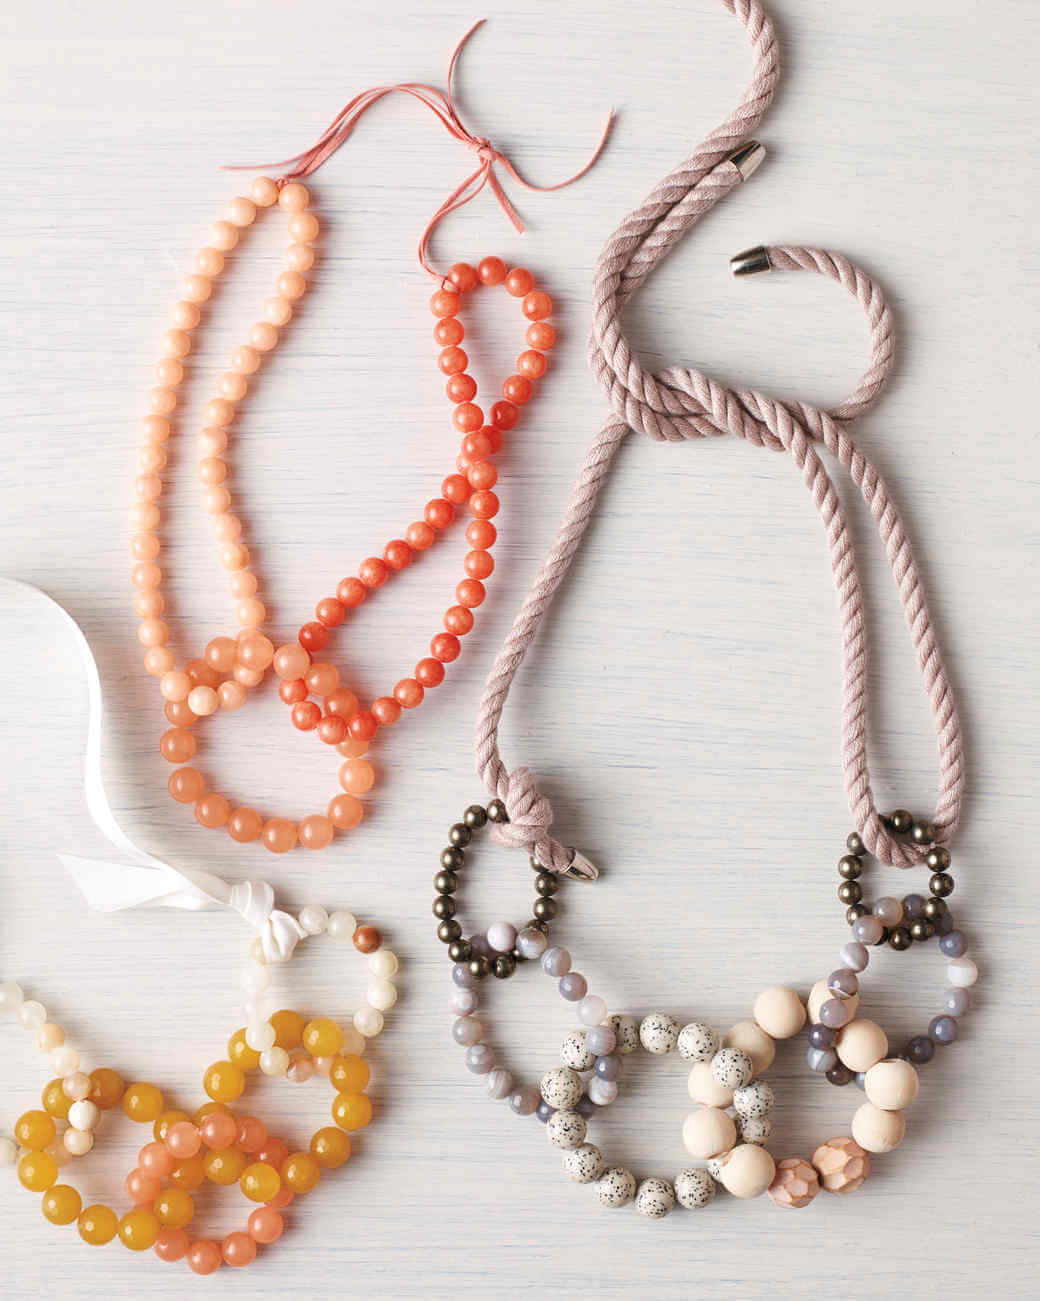 Three necklaces of different colors and shapes on a white surface
